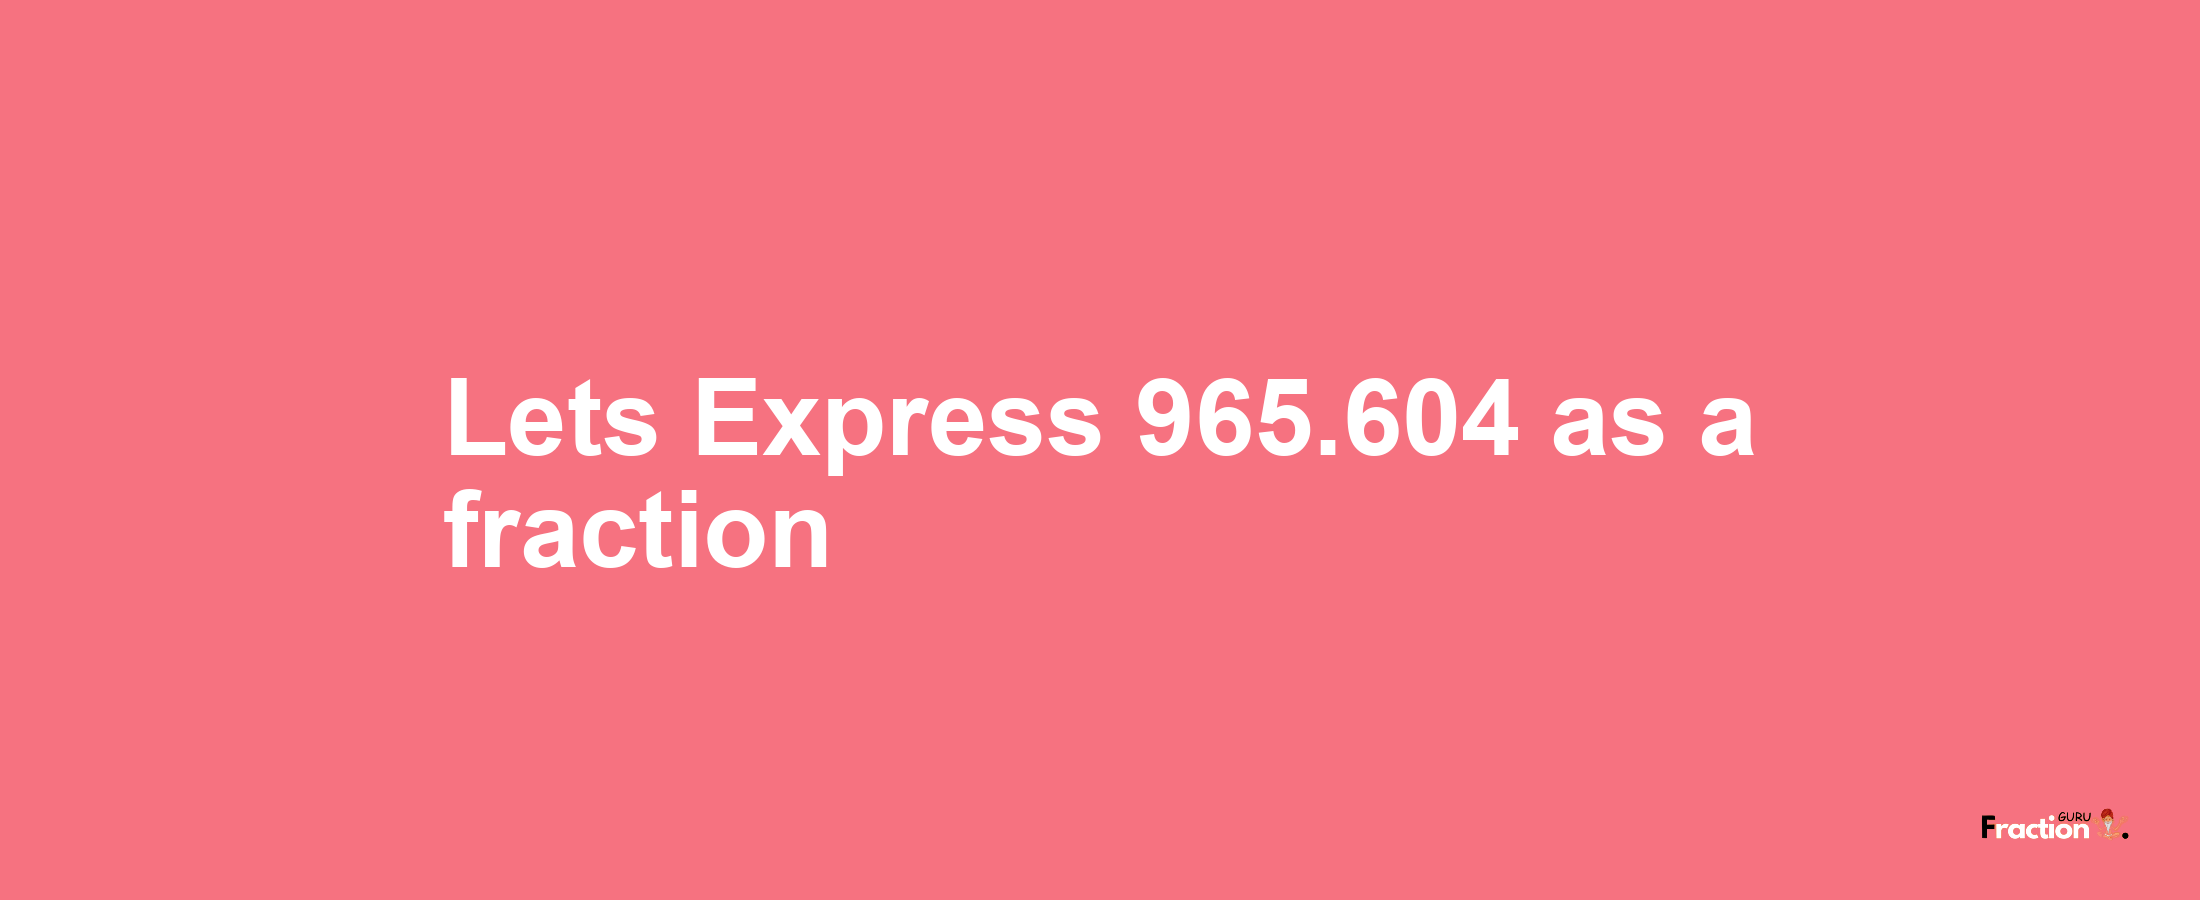 Lets Express 965.604 as afraction